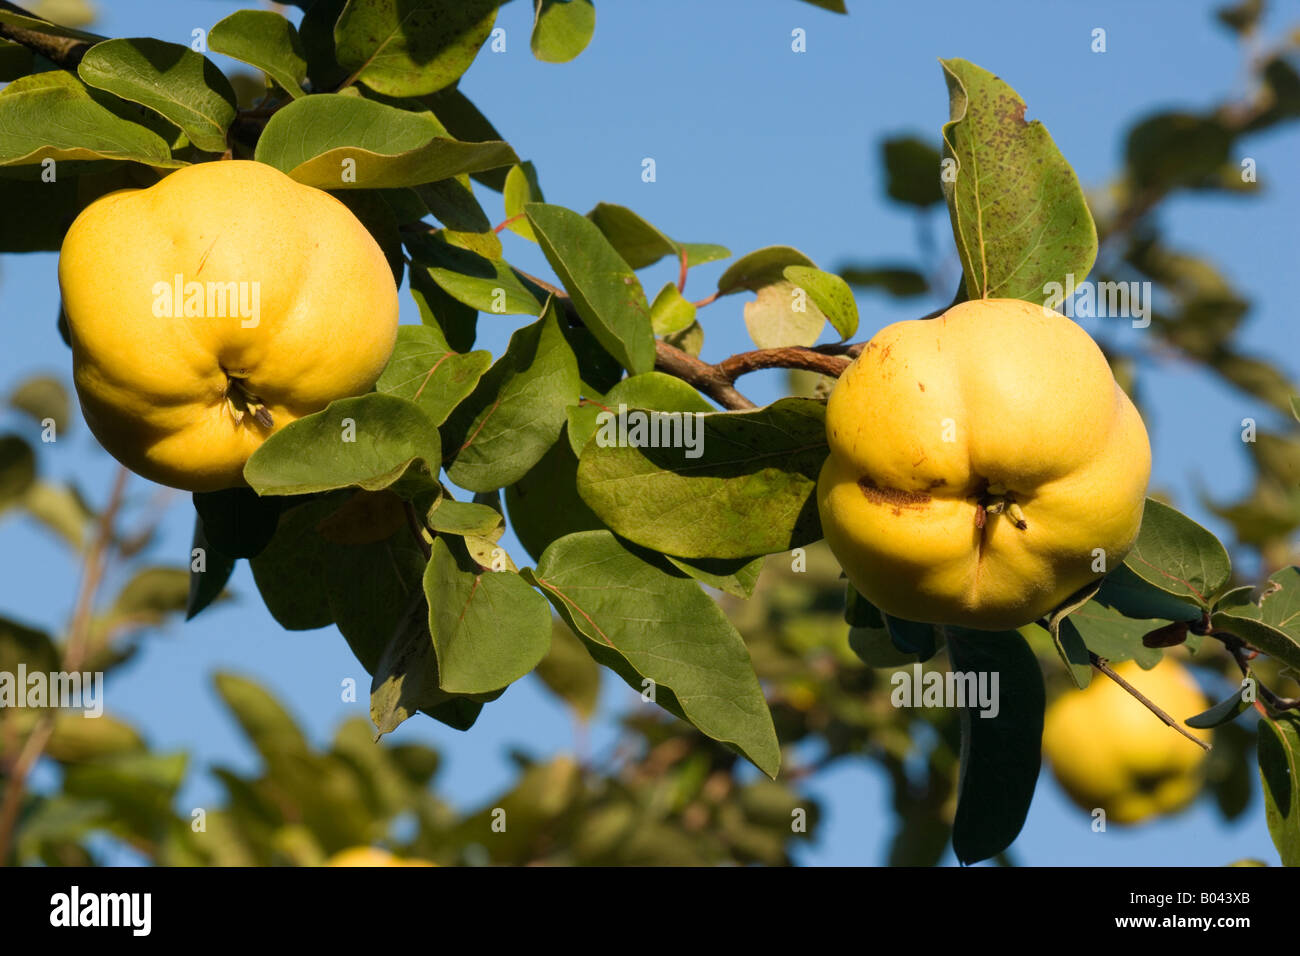 Quinces ripe fruits hanging on branch of quince tree Germany Stock Photo